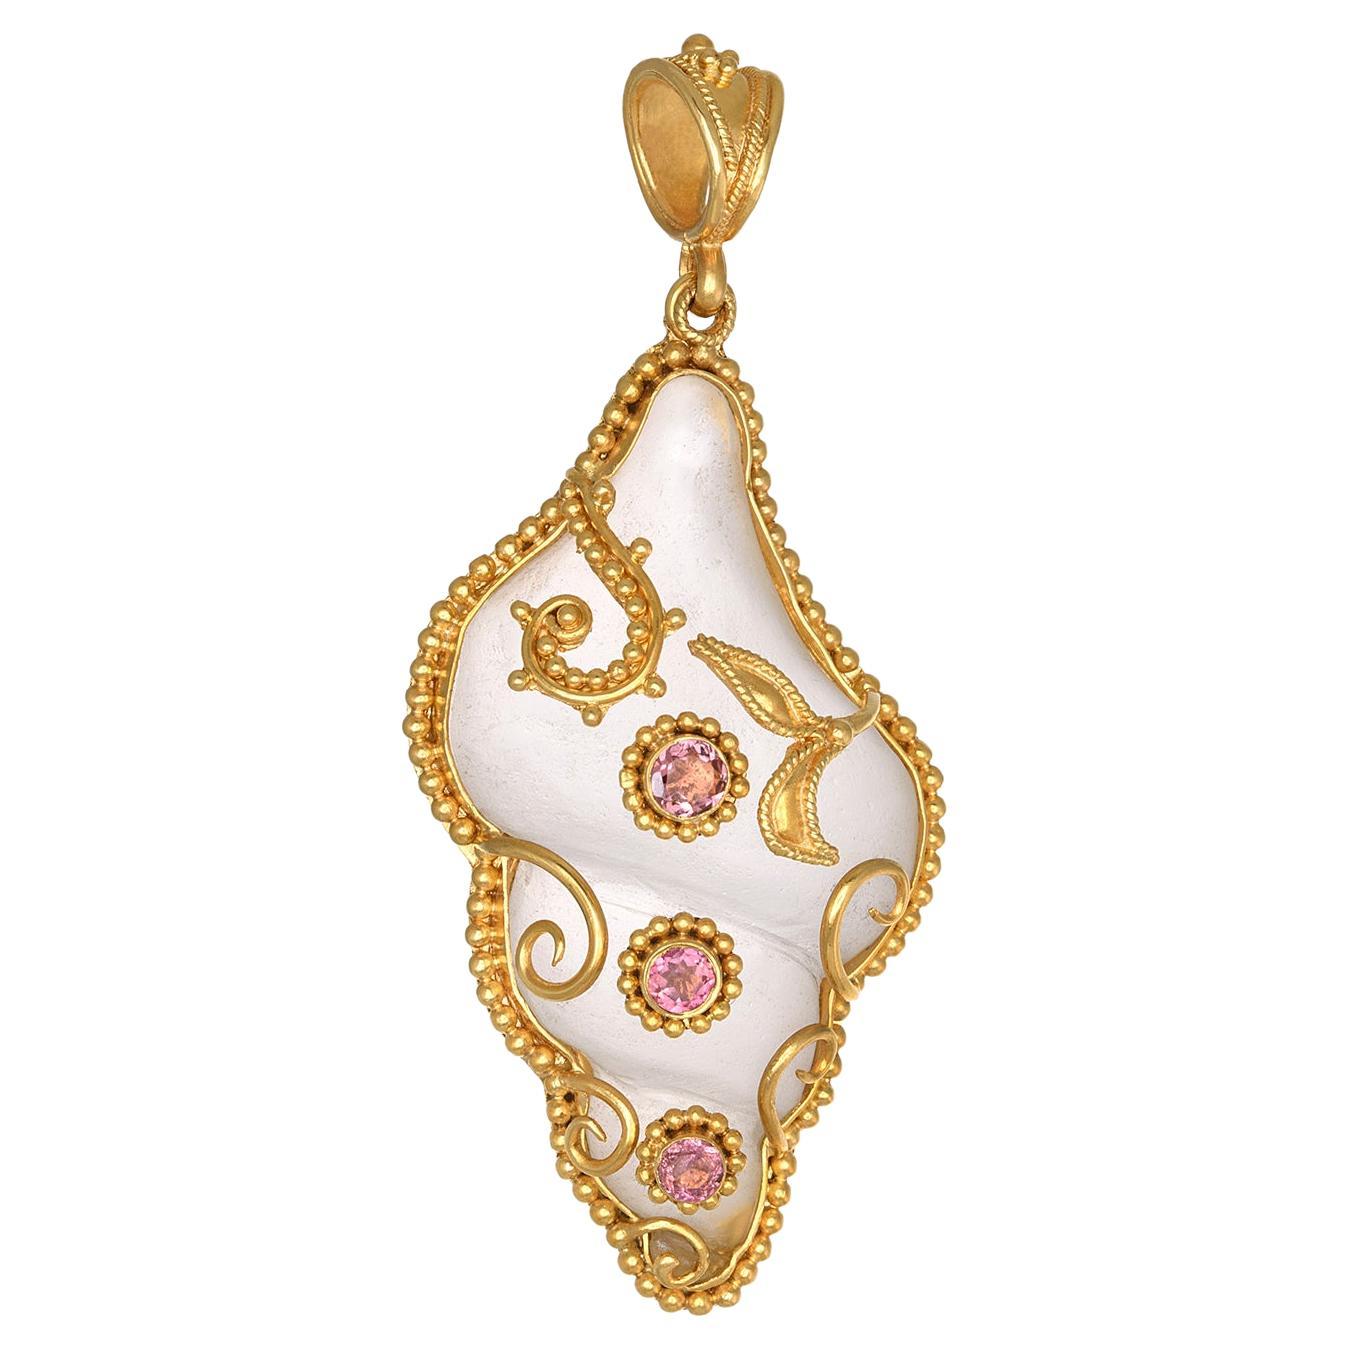 Rock Crystal Granulation Shell Pendant with Tourmalines in 22Kt Yellow Gold